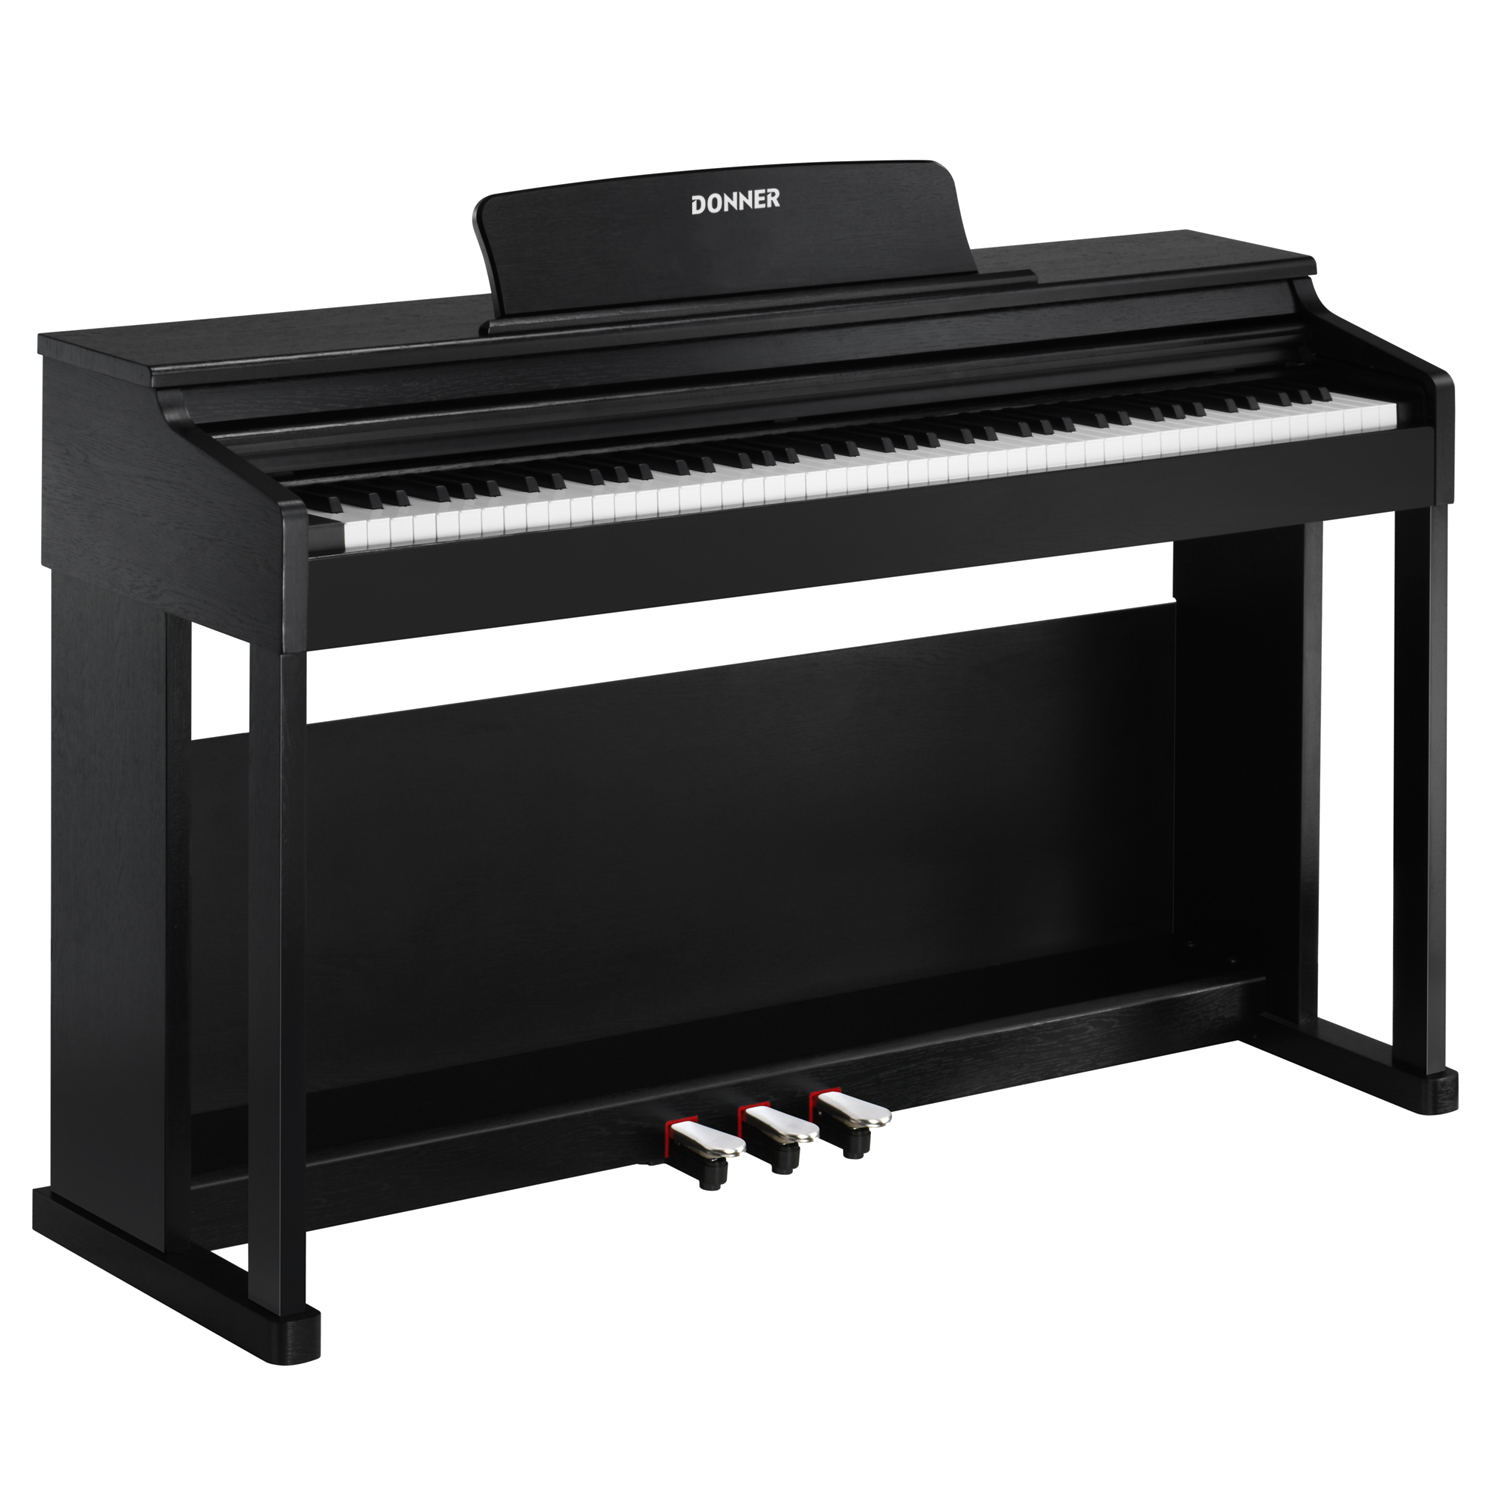 

Donner DDP-100 88 Weighted Key Hammer Action Upright Digital Piano with Furniture Stand & 3 Pedal for Beginners Black/White